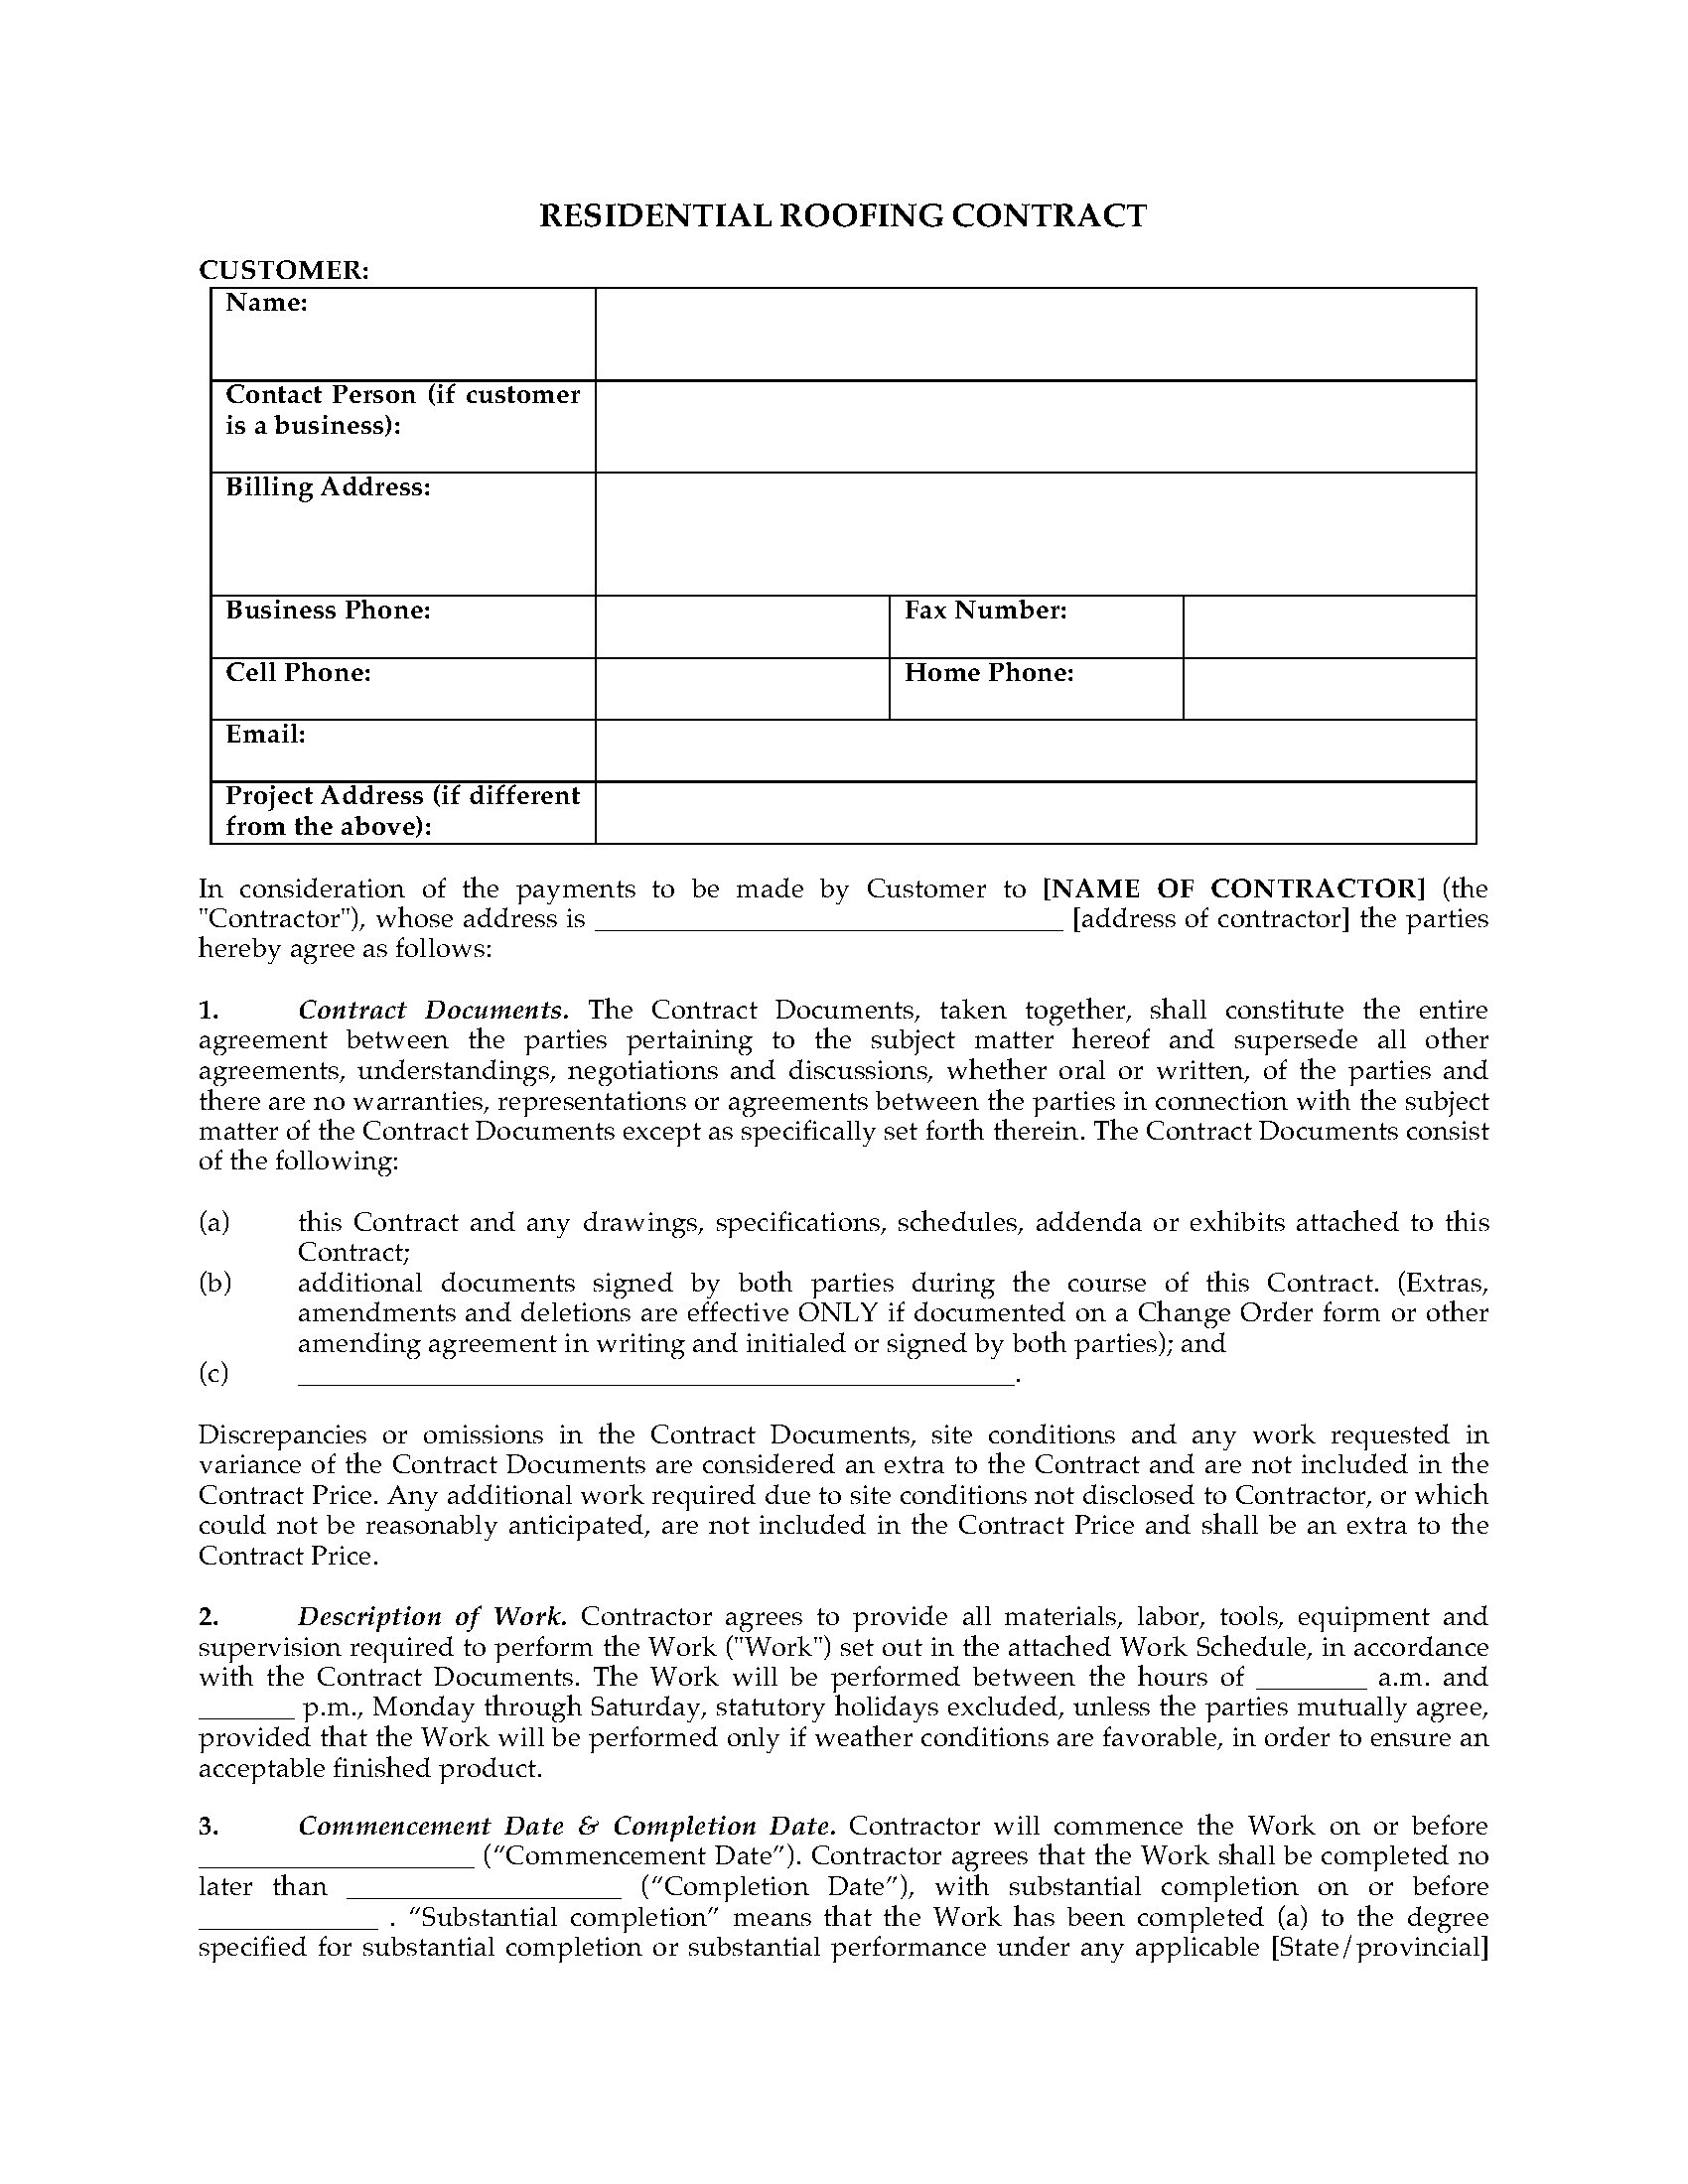 roofing-contract-residential-legal-forms-and-business-templates